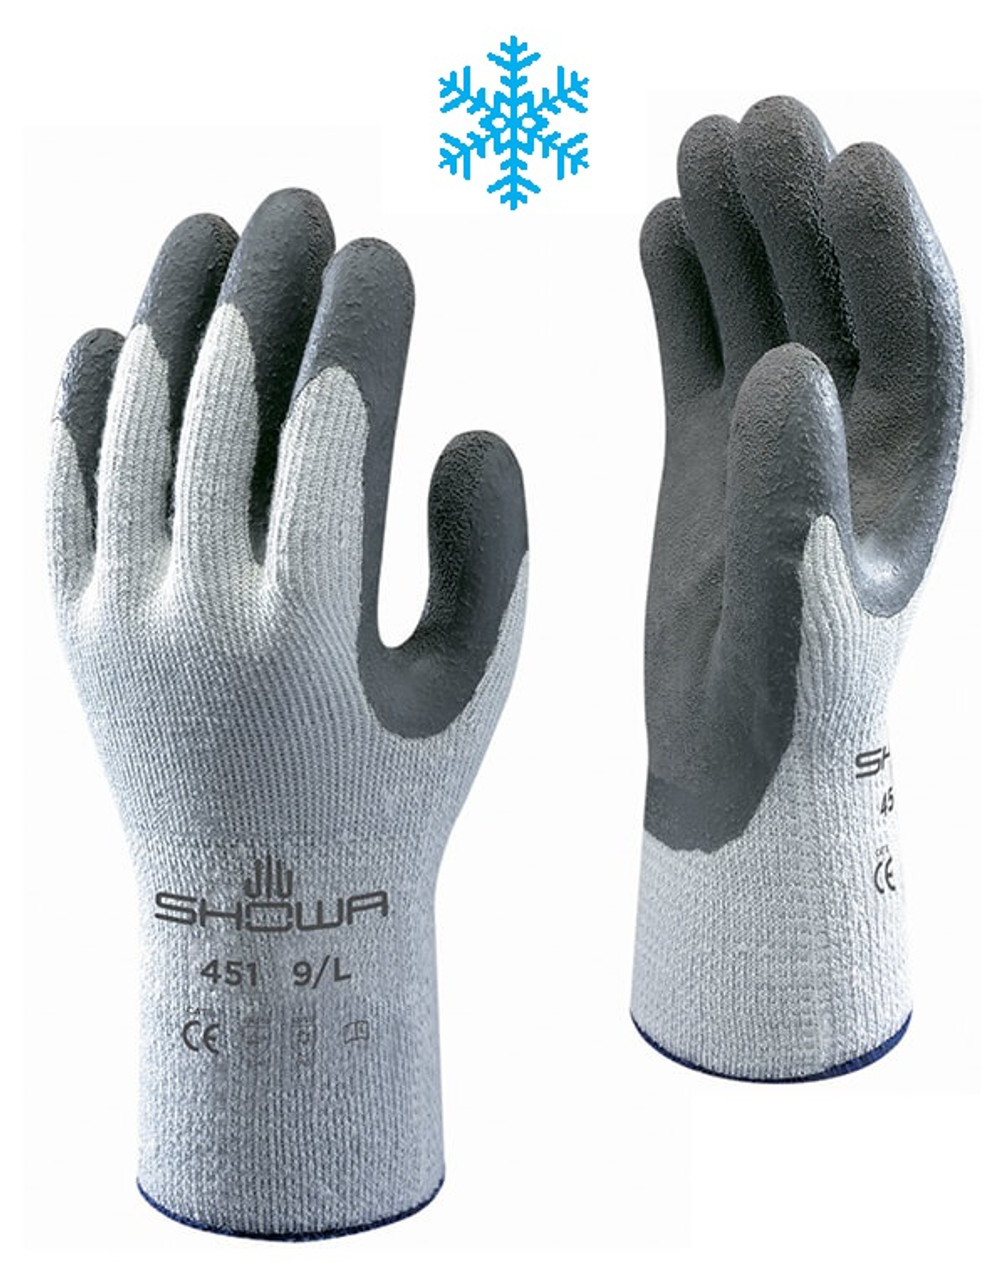 Showa Insulated Rubber-Coated Jersey Work Gloves